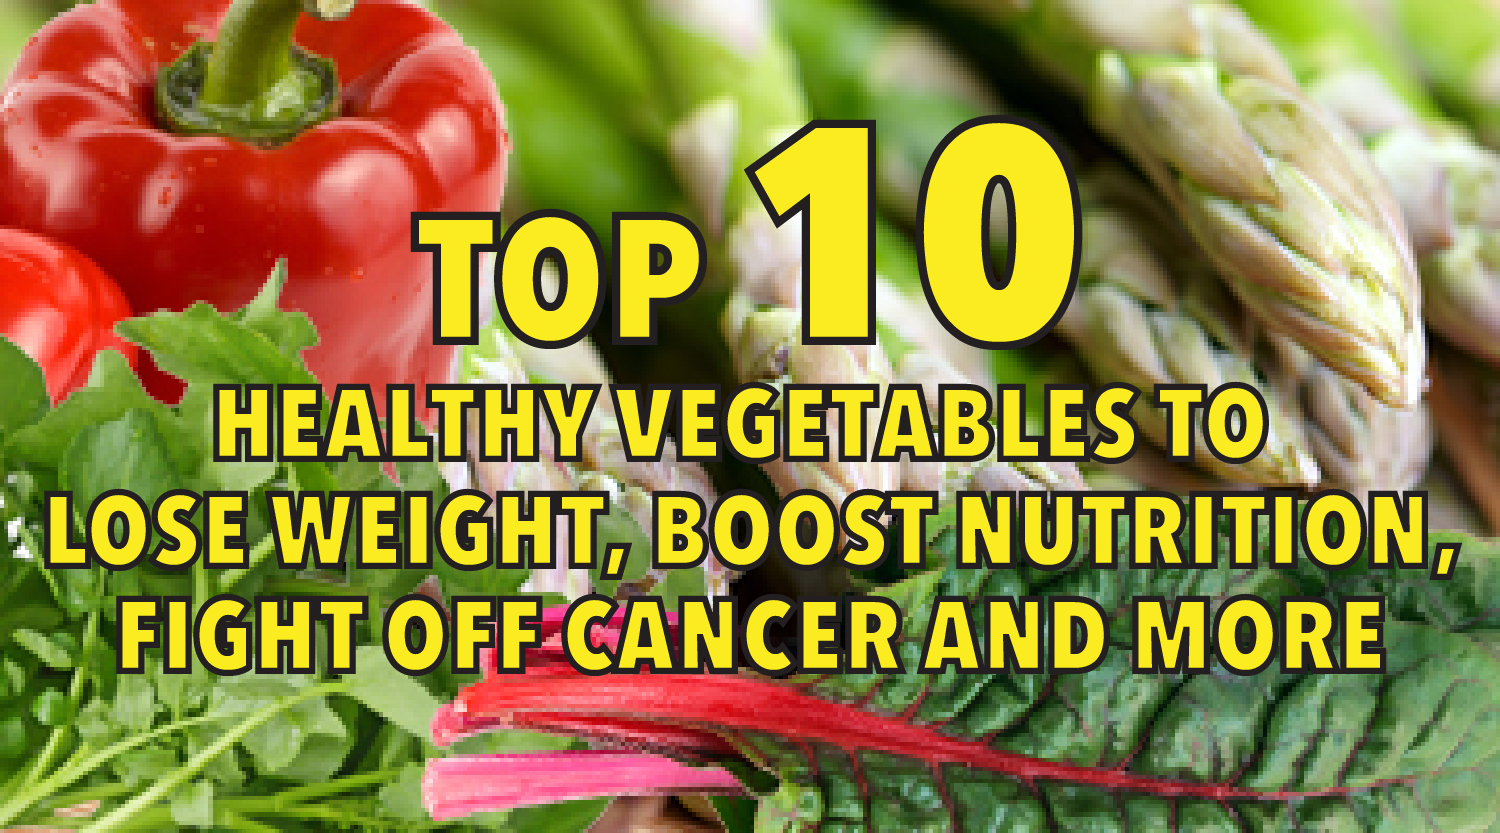 Top 10 Healthy Vegetables to Lose Weight, Boost Nutrition, Fight off Cancer and More